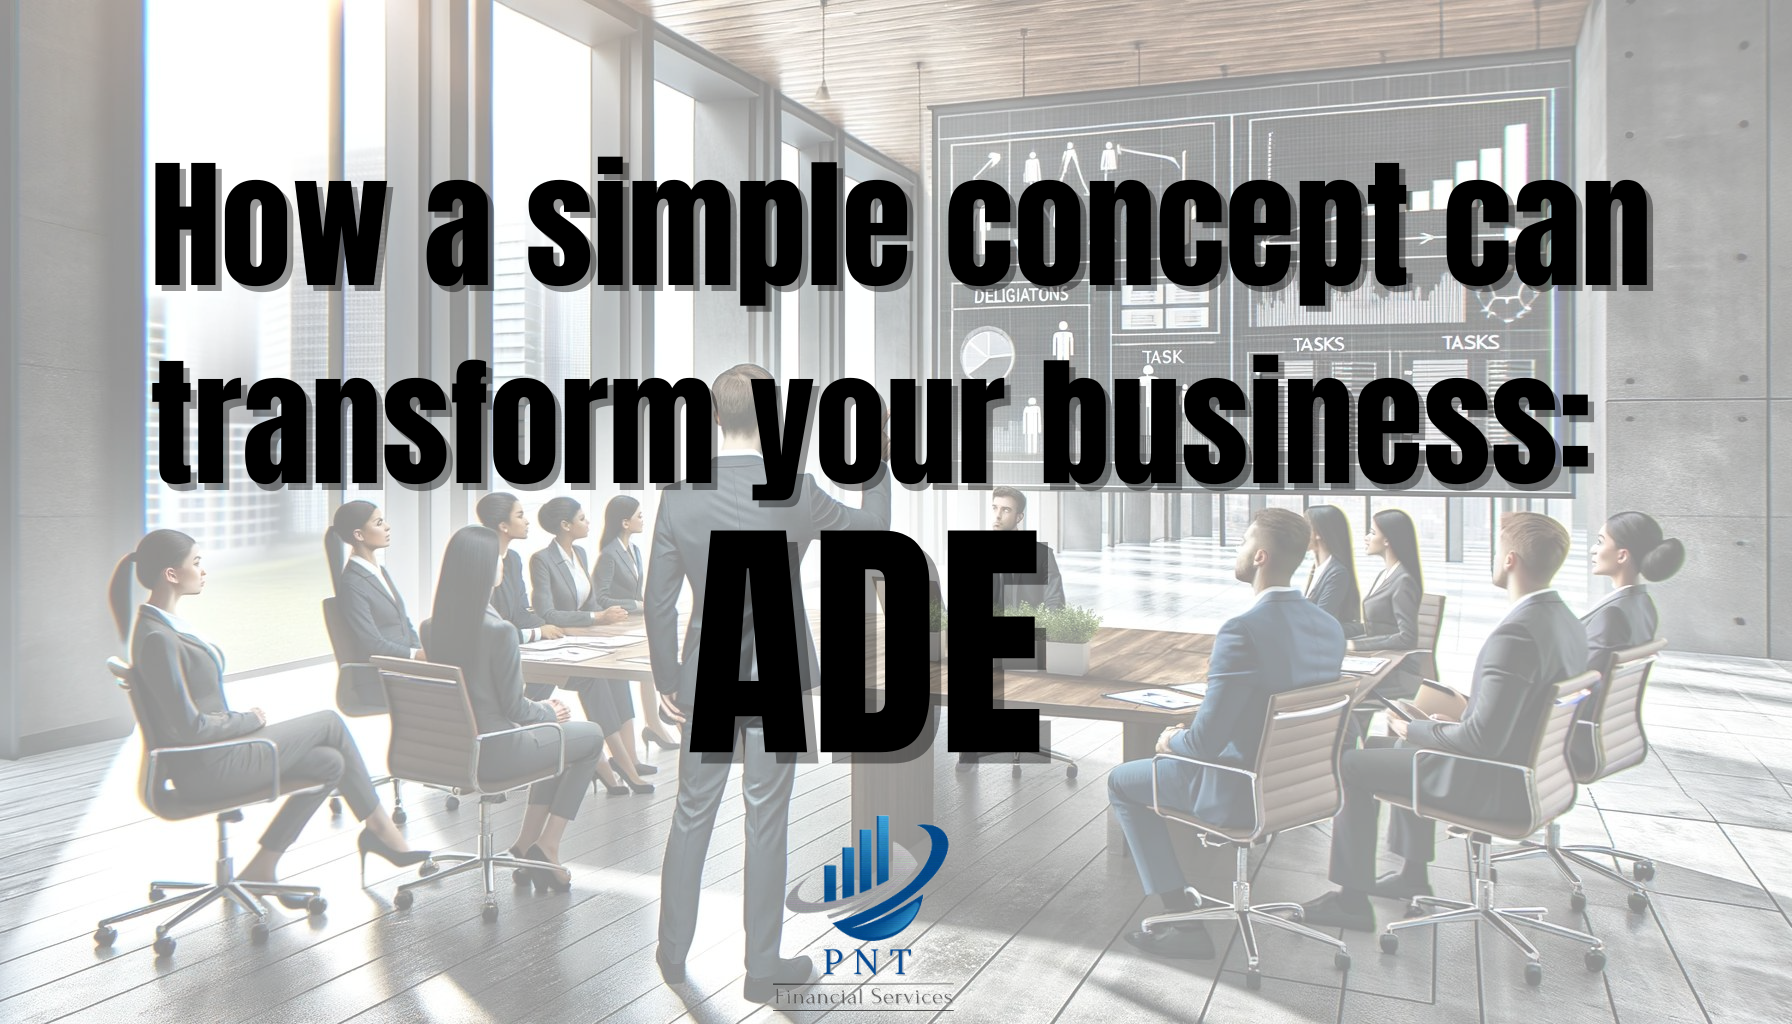 How a simple concept can
transform your business:

Y